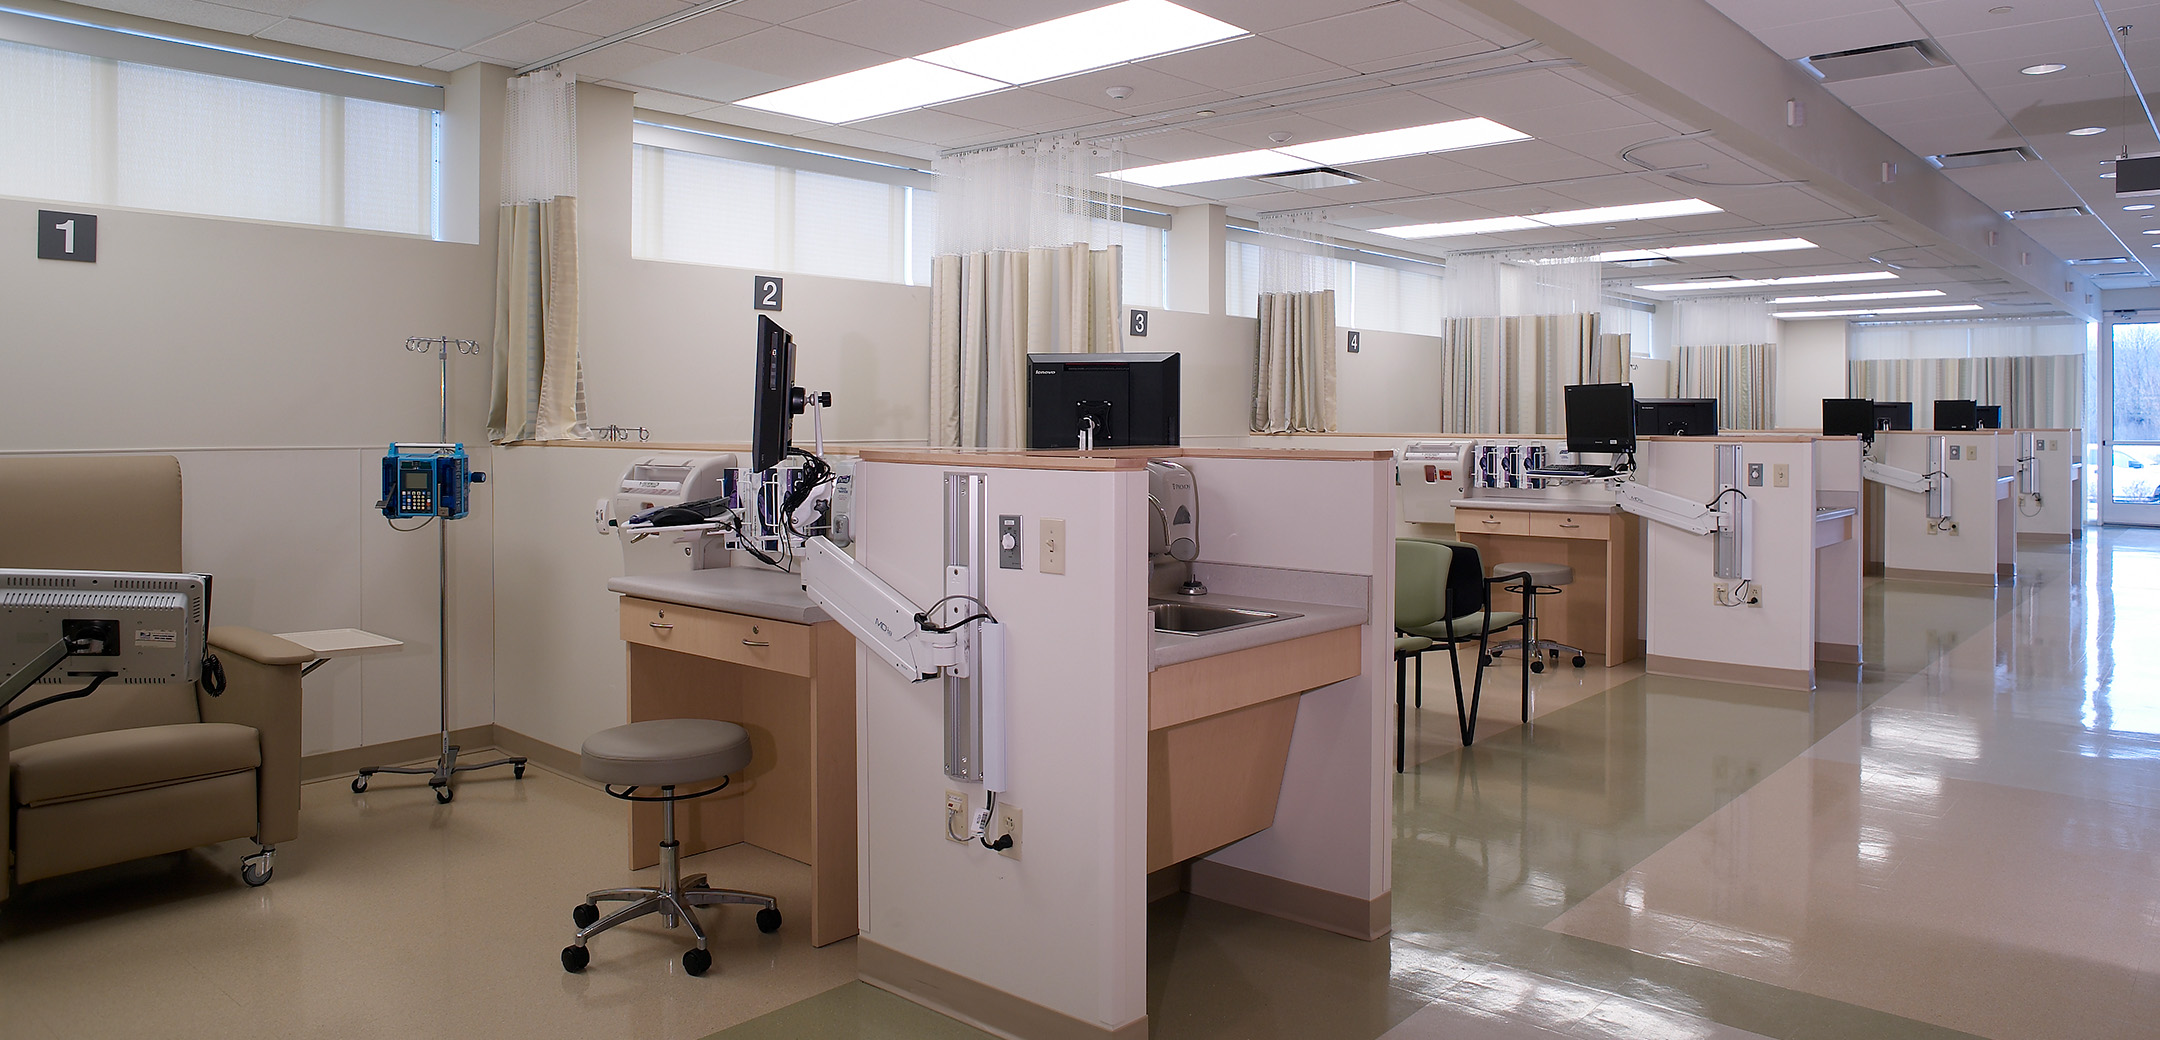 An interior view of the Abramson Cancer Center showcasing the individual patient examination cubicles with extendable monitors and accessible faucets.